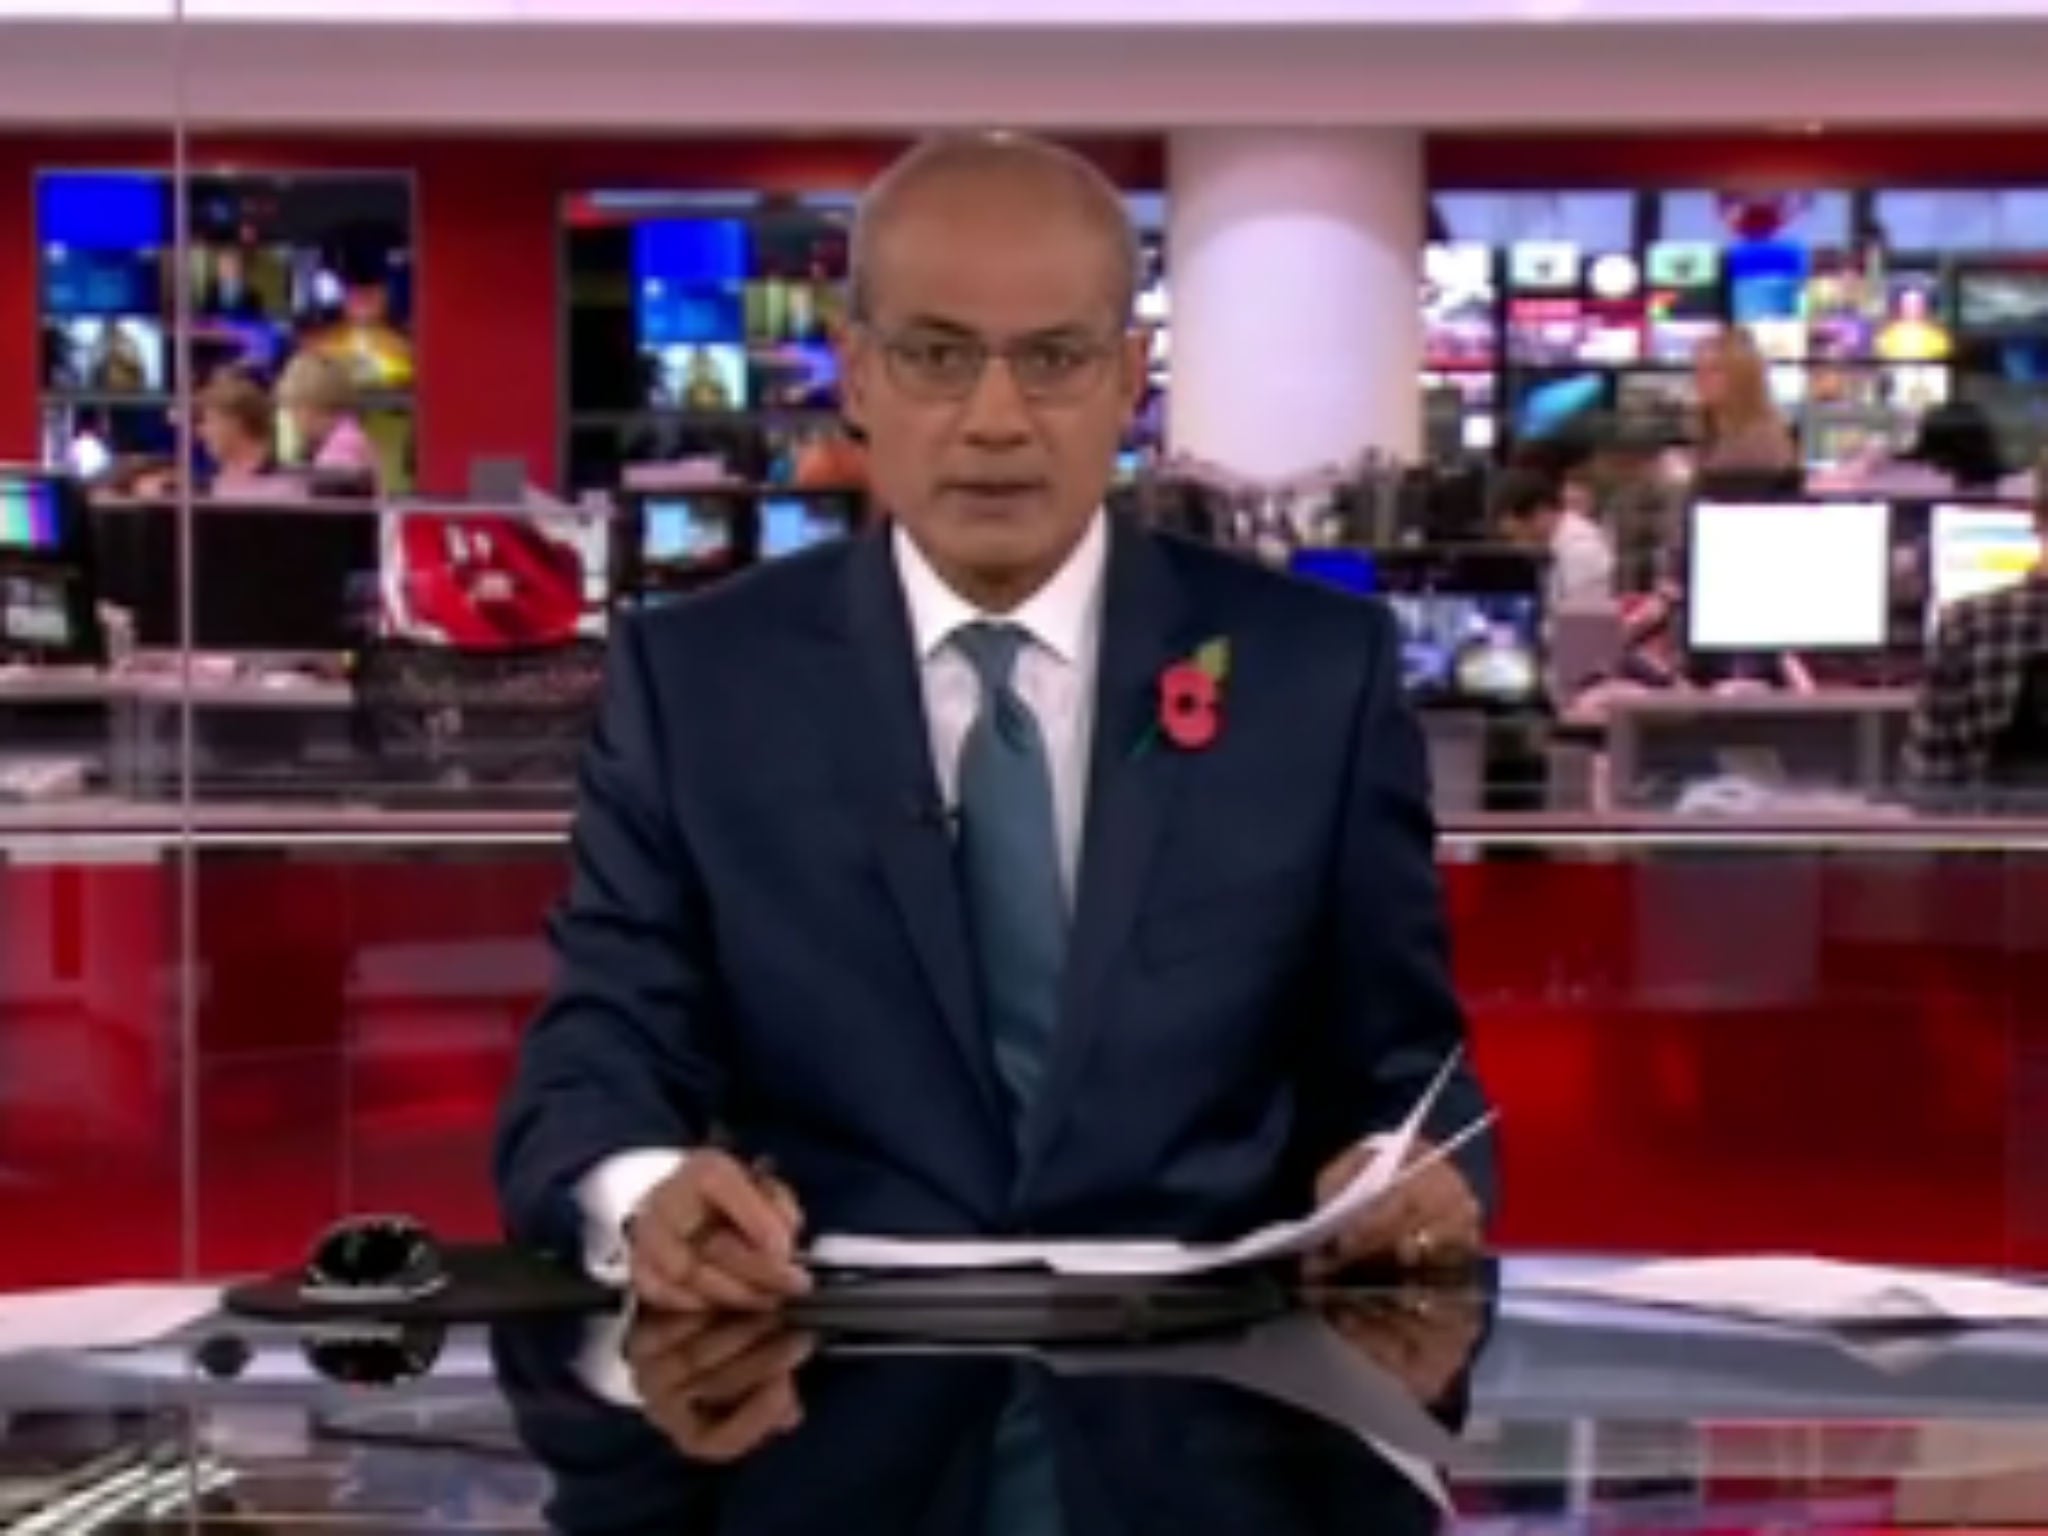 George Alagiah presents the News at Six